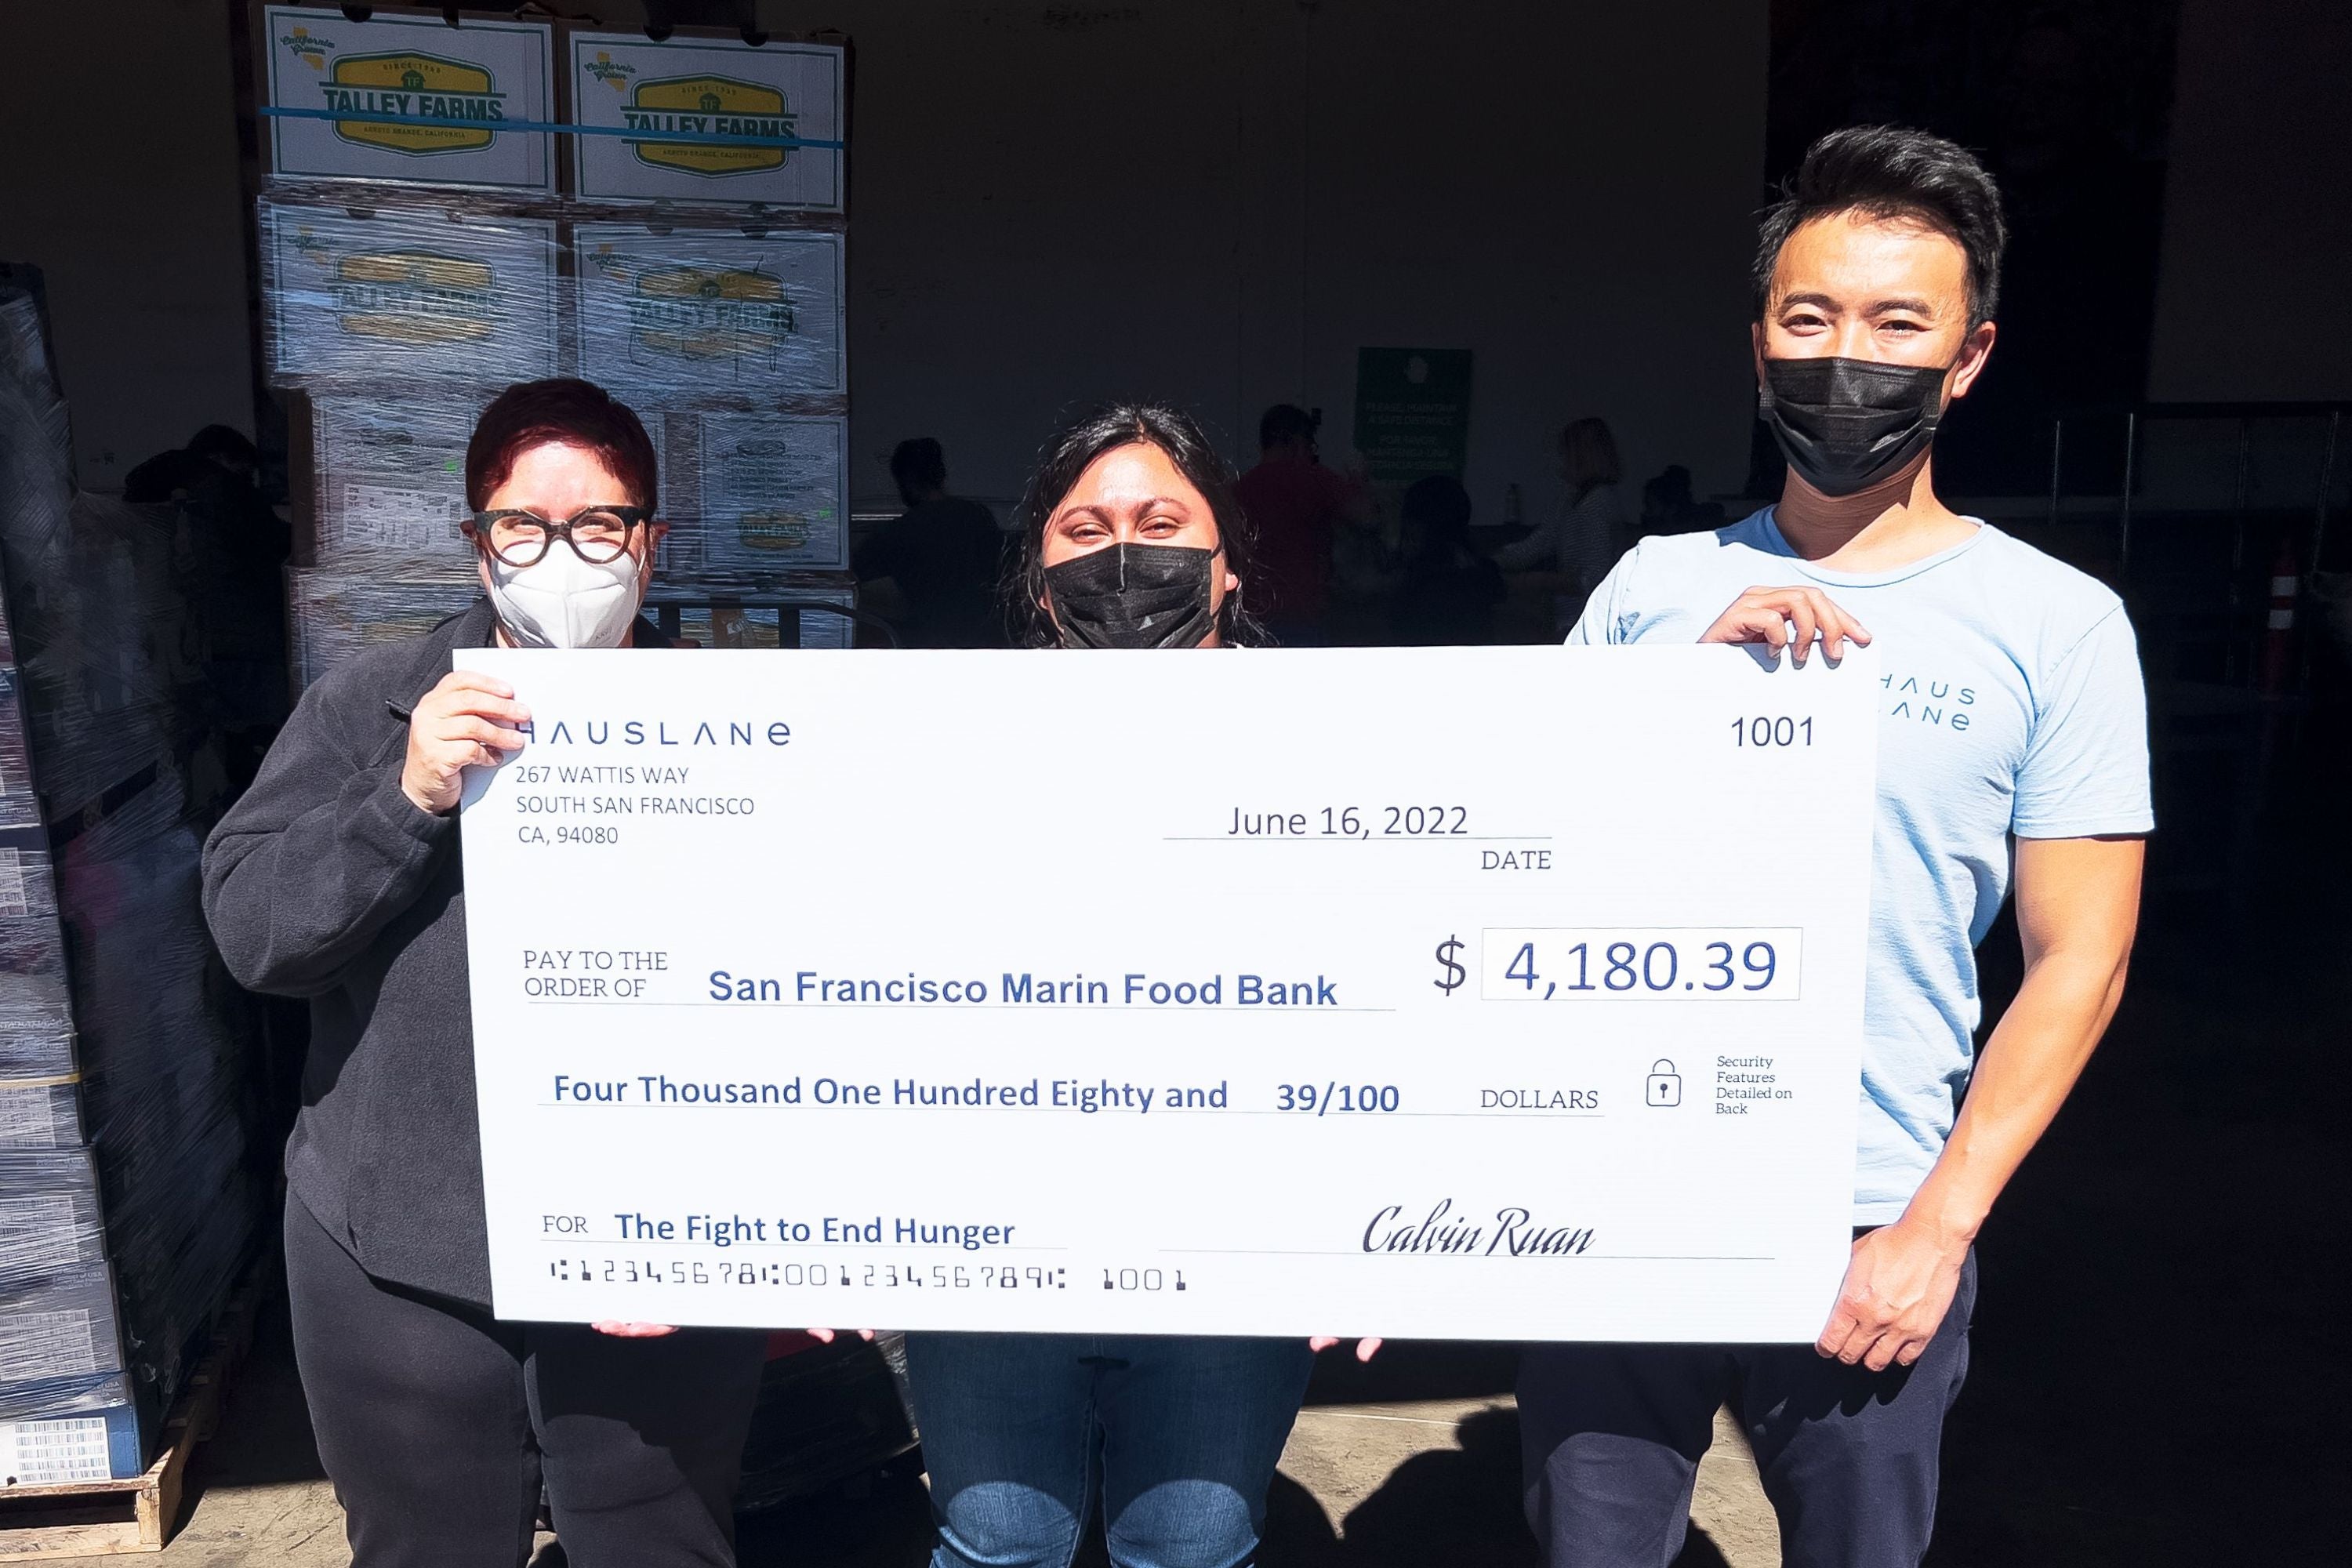 Hauslane partners with Marin Food Bank in May to support world hunger and raises over four thousand dollars in a successful charity campaign